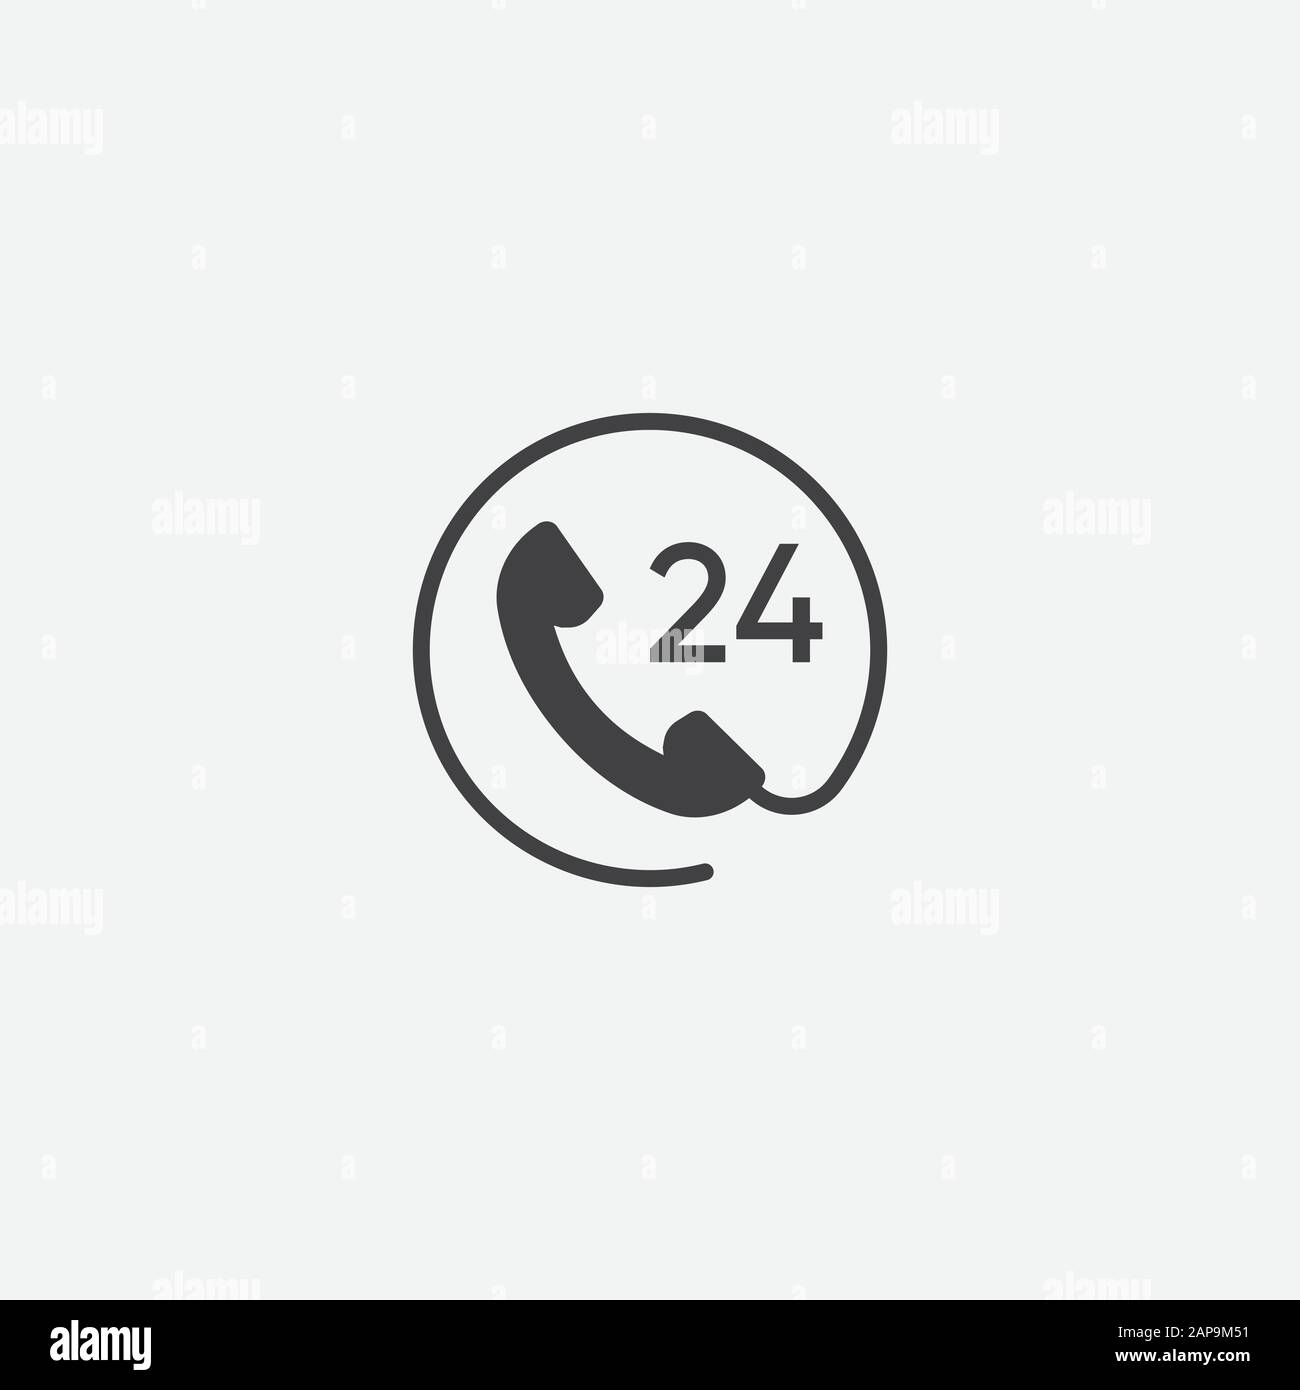 Call 24 icon vector illustration, 24 hour call service, Twenty four hour service flat design, 24h Support Simple Design, All day customer support call center icon, Telephone support 24 hours symbol Stock Vector